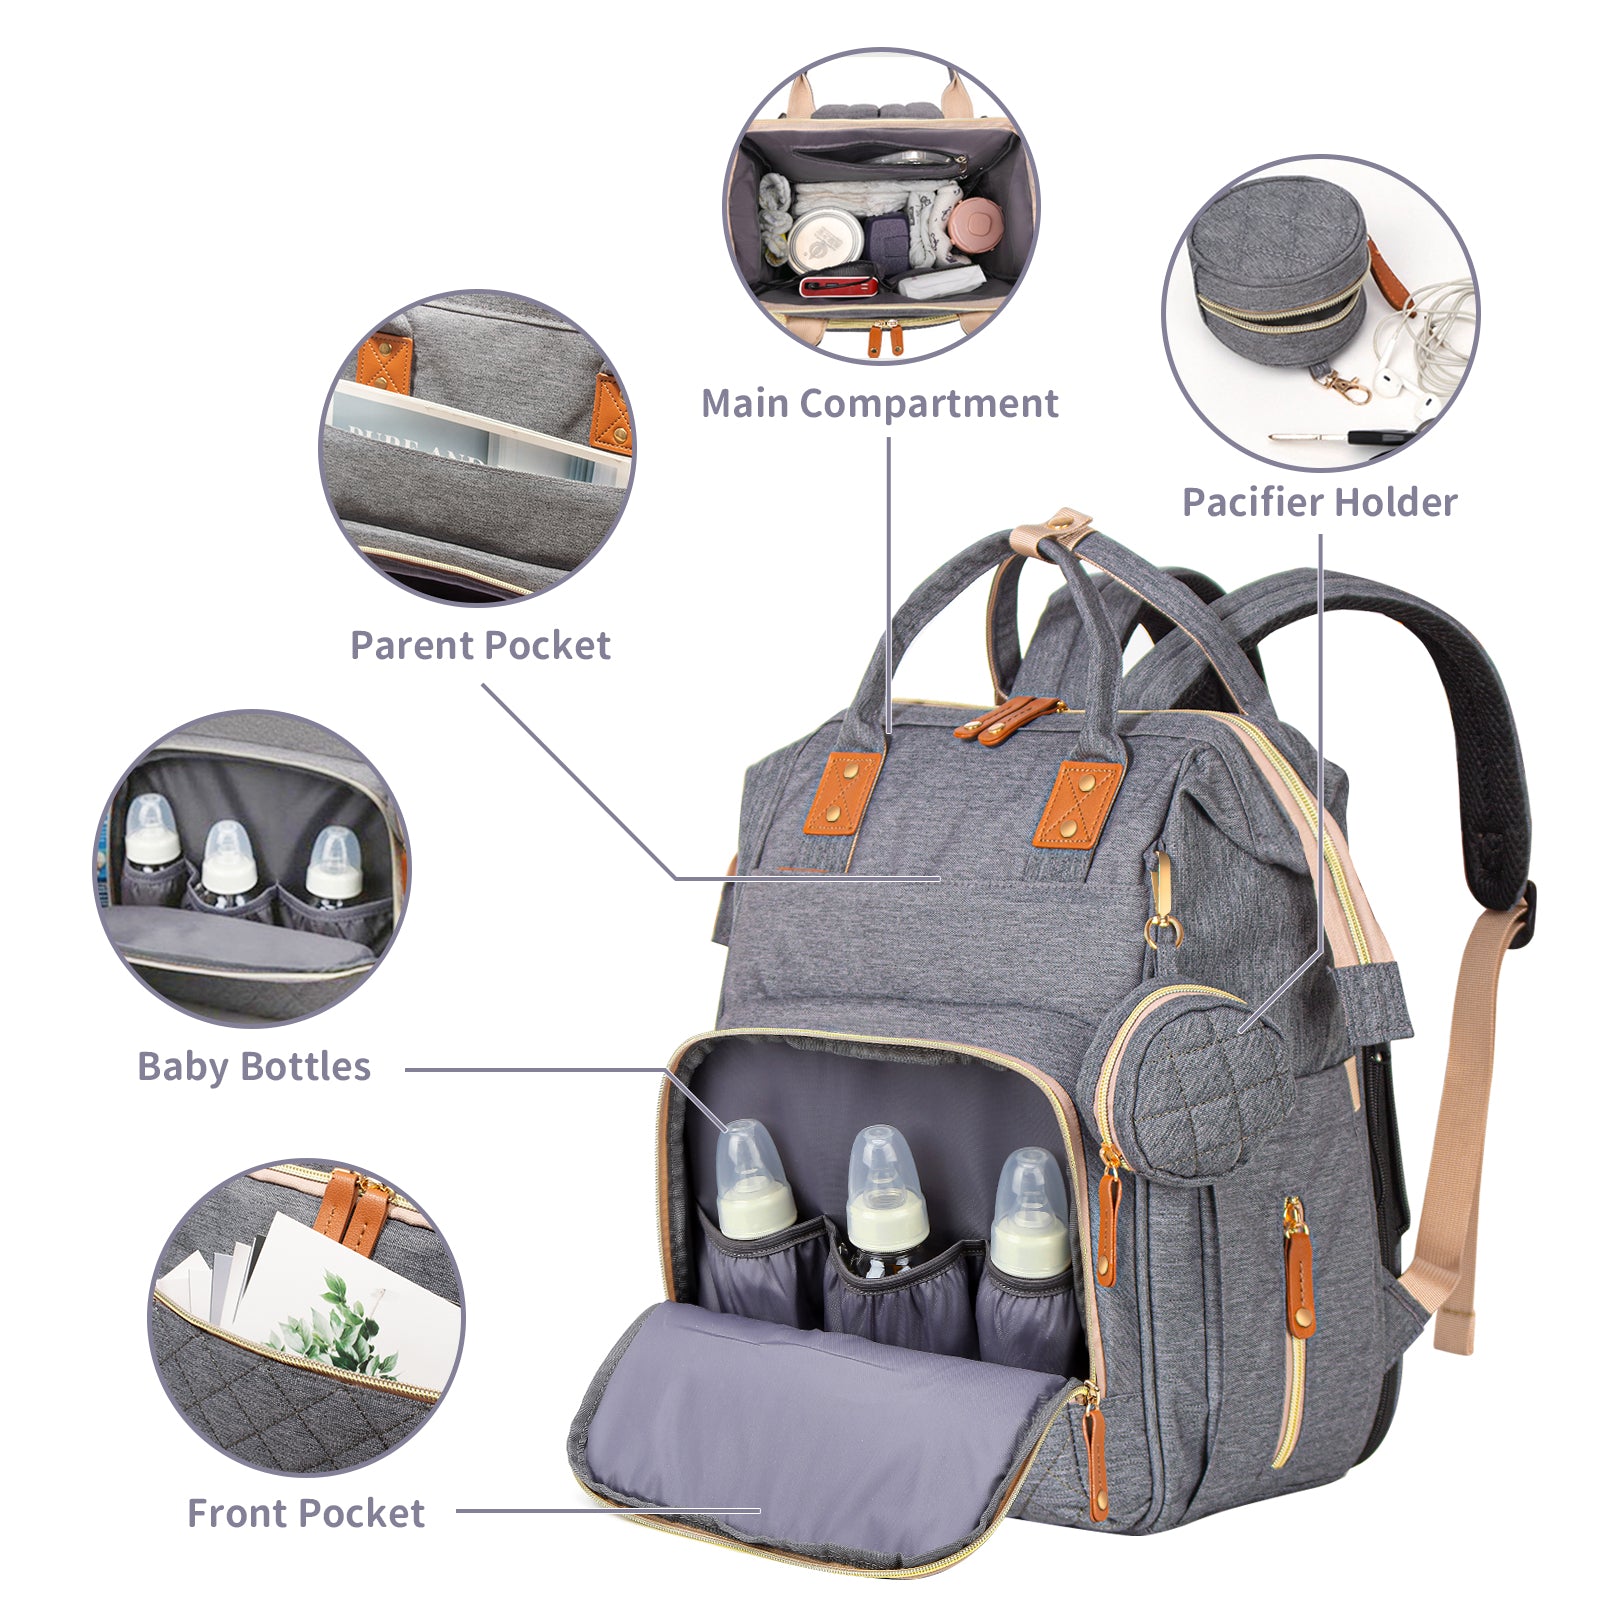 Diaper-Backpack-with-Foldable-Baby-Bed-Large-Capacity-Waterproof-Portable-Multifunction-Diaper-Bag-with-Mat-Pacifier-Holder-and-USB-Port-Dark-Grey-Diaper-Backpack-with-Foldable-Baby-Bed-Dark-Gray